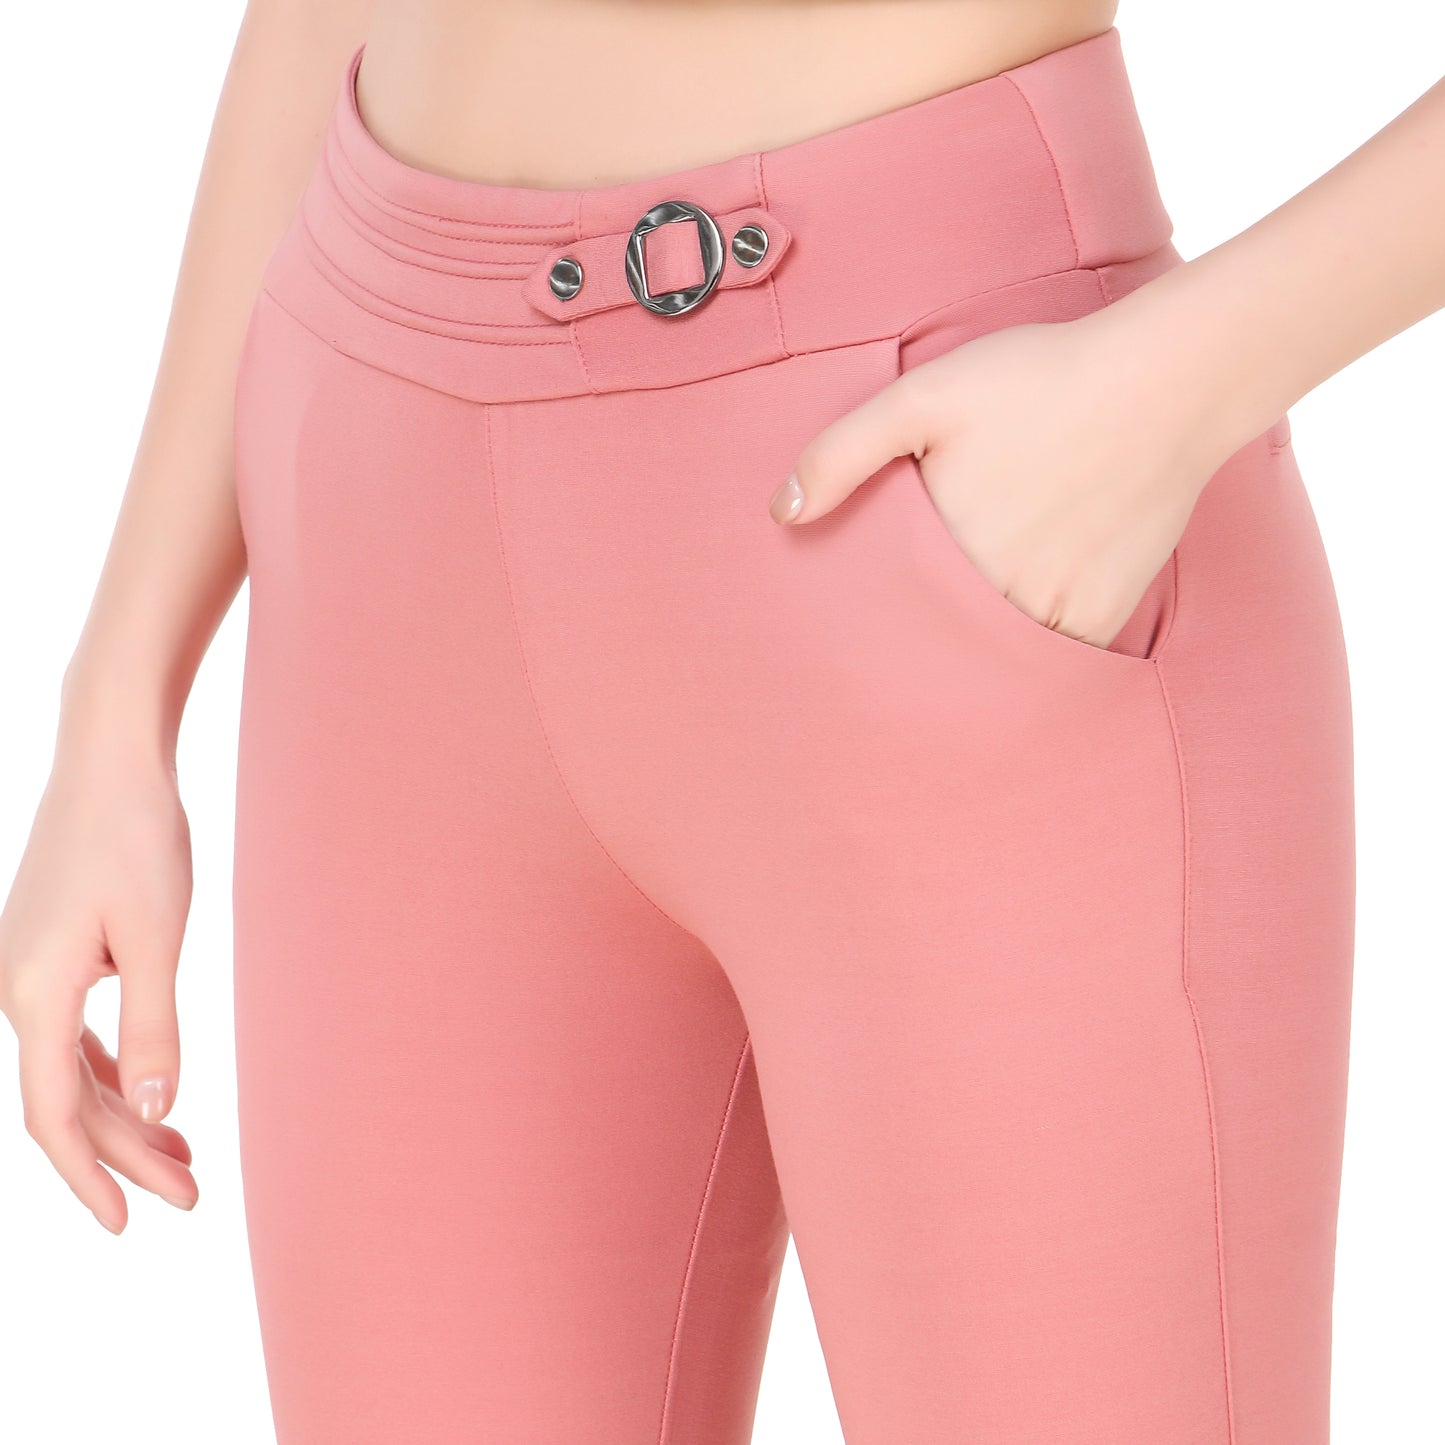 Most Comfortable Women's Mid-Waist Jeggings with 2 Front Pockets - Pink